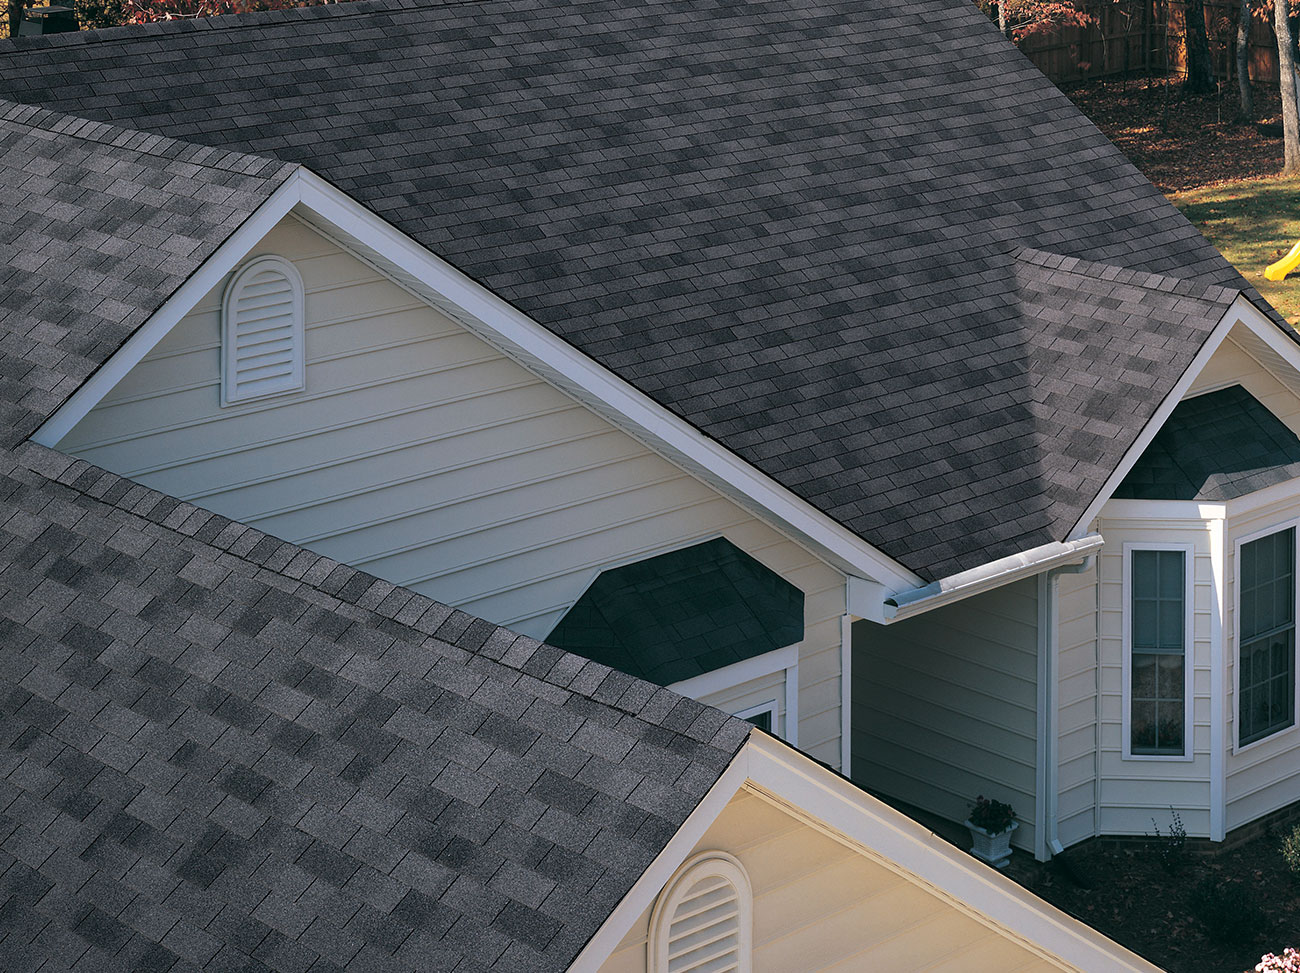 GAF vs. CertainTeed Roofing Shingles: What’s the Difference?